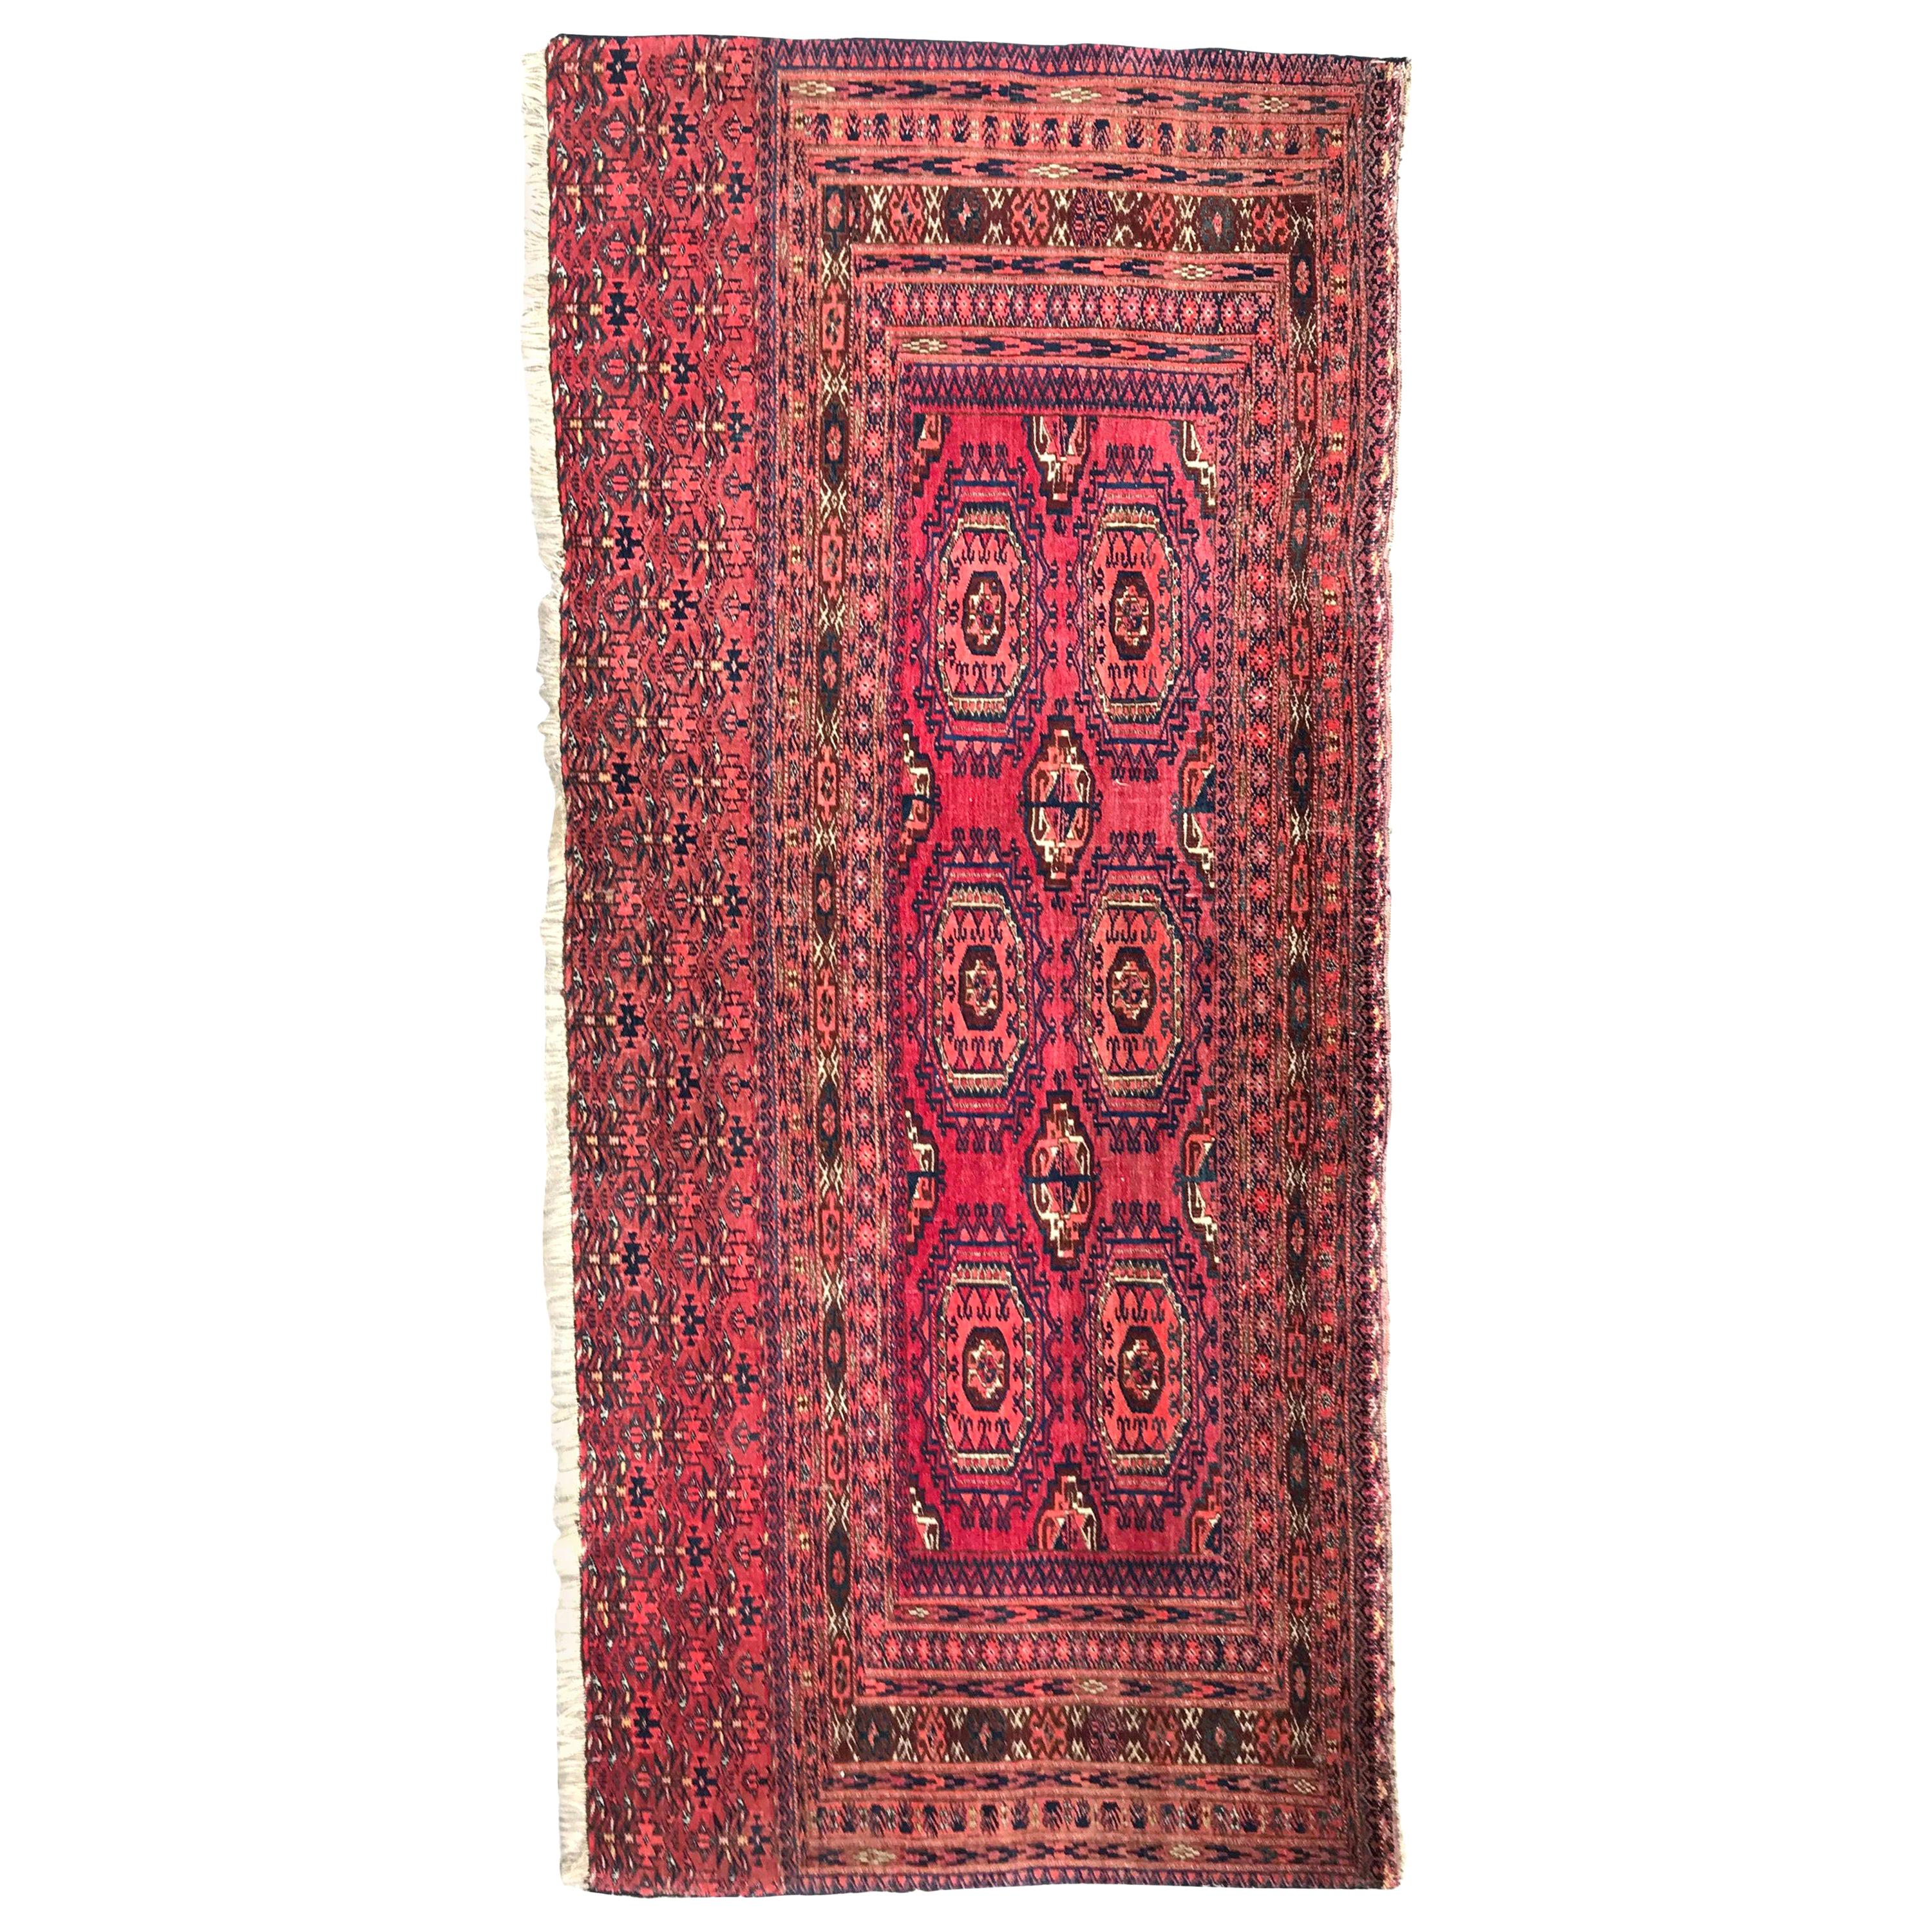 Bobyrug’s Antique Turkmen Yomut Chuval Horse Cover Rug For Sale